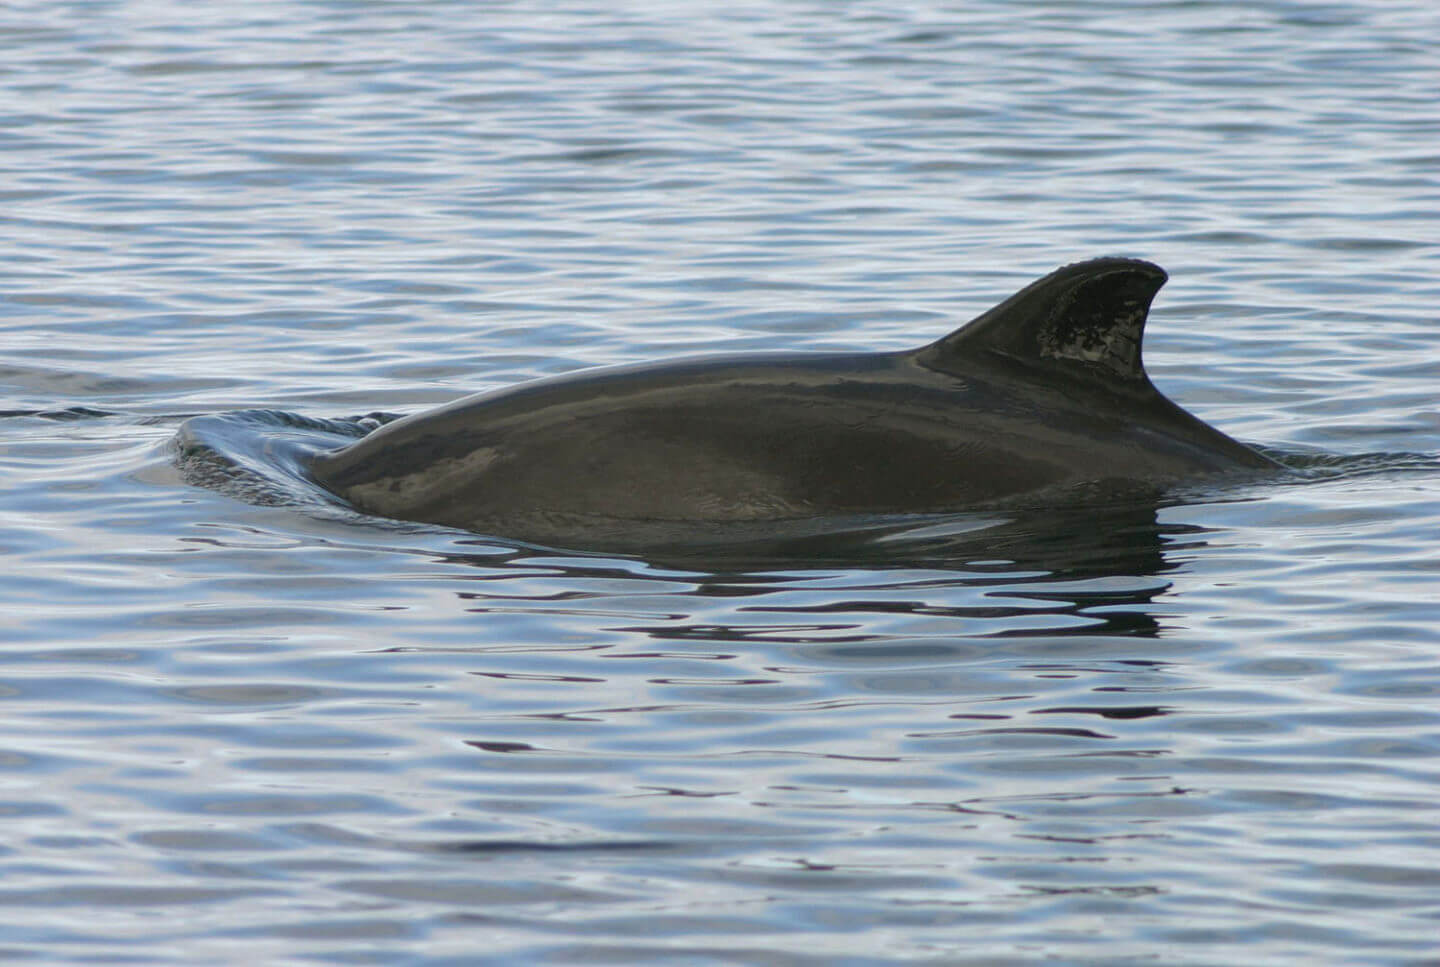 Energy firms prevented porpoise protection 7